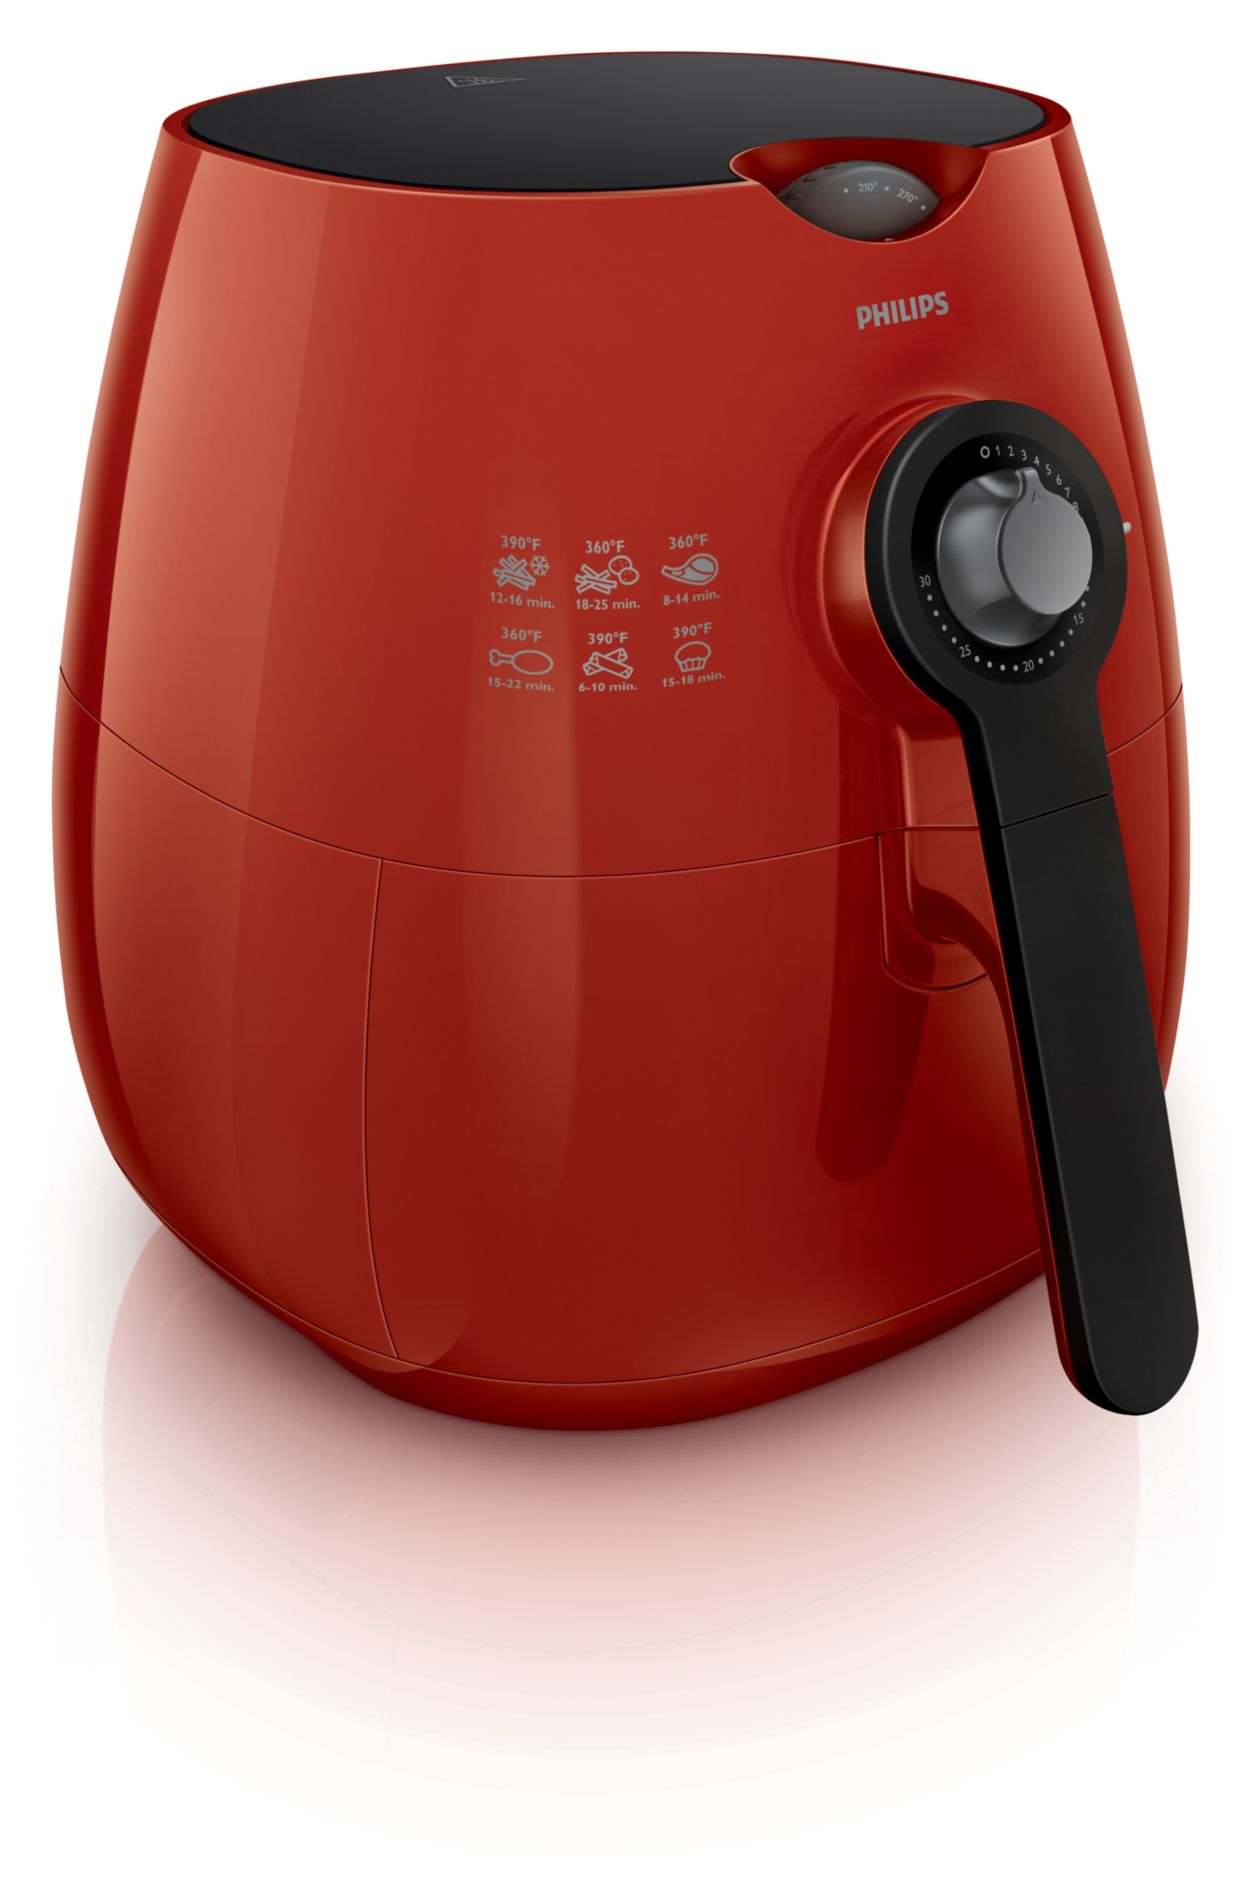 Viva Collection Airfryer HD9220/66